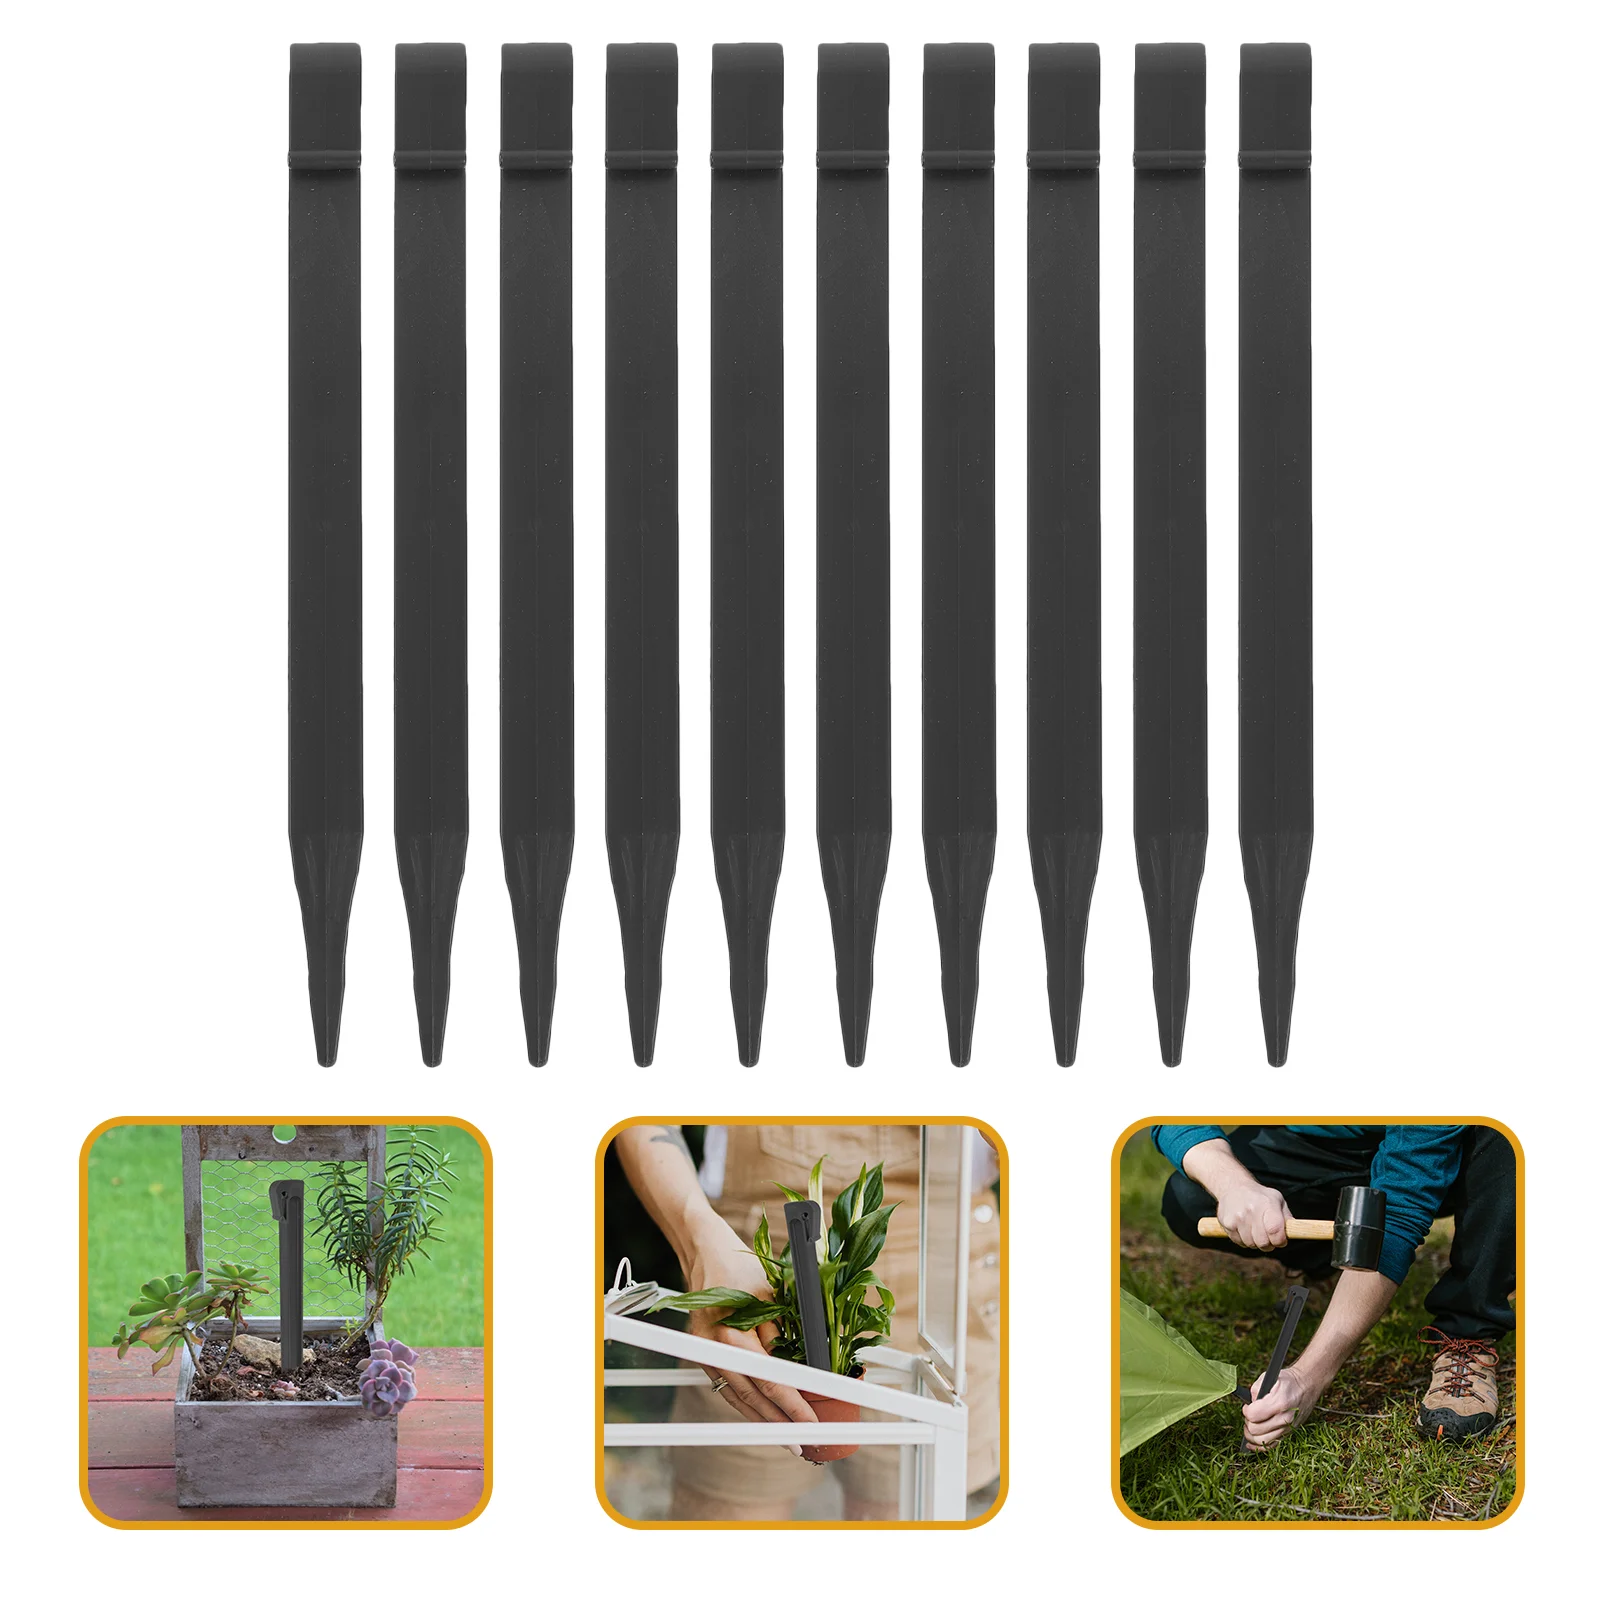 

10 Pcs Camping Canopy Nail Shaped Stake Landscaping Stakes Ground Nails Gardening Pegs Landscape Edging